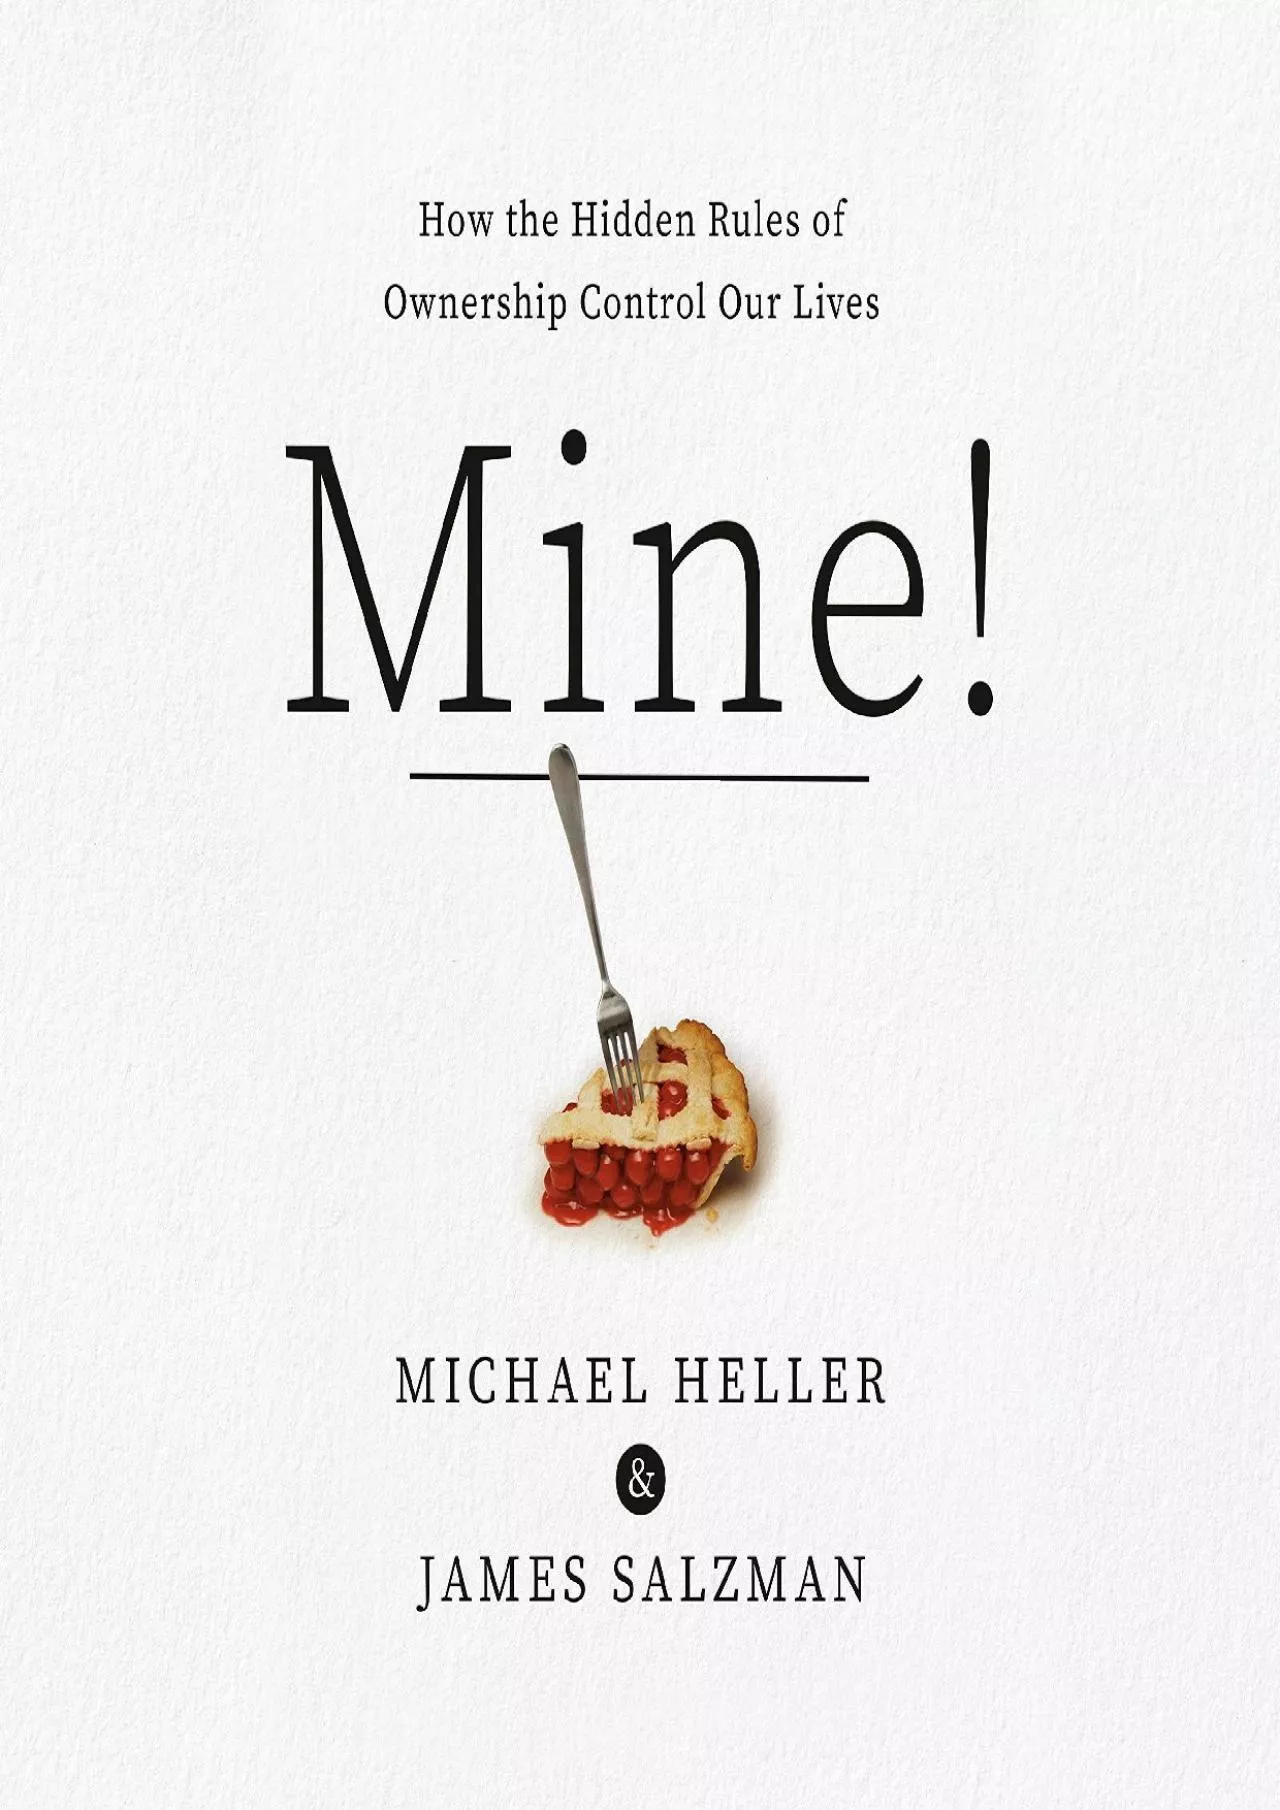 (BOOK)-Mine!: How the Hidden Rules of Ownership Control Our Lives